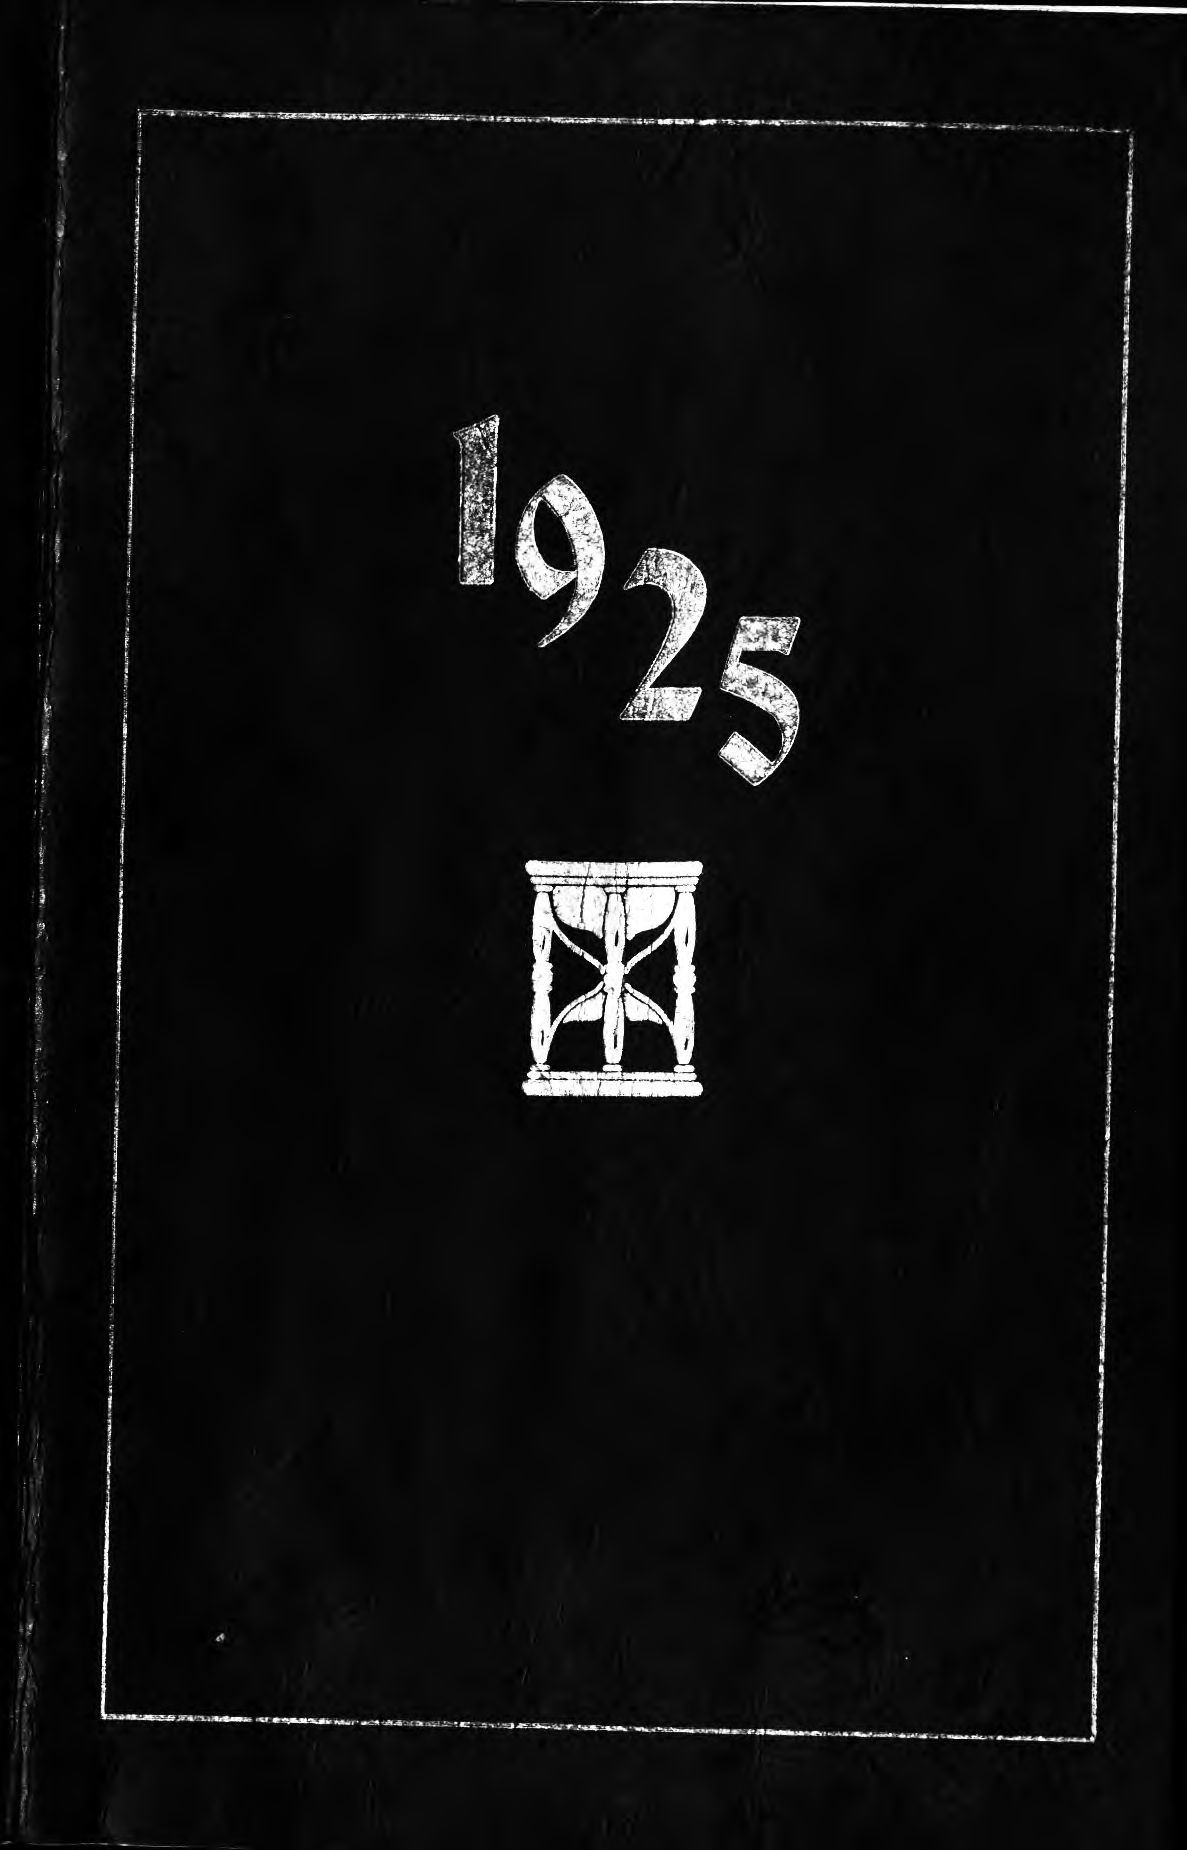 1925 Chelmsford High Yearbook 1